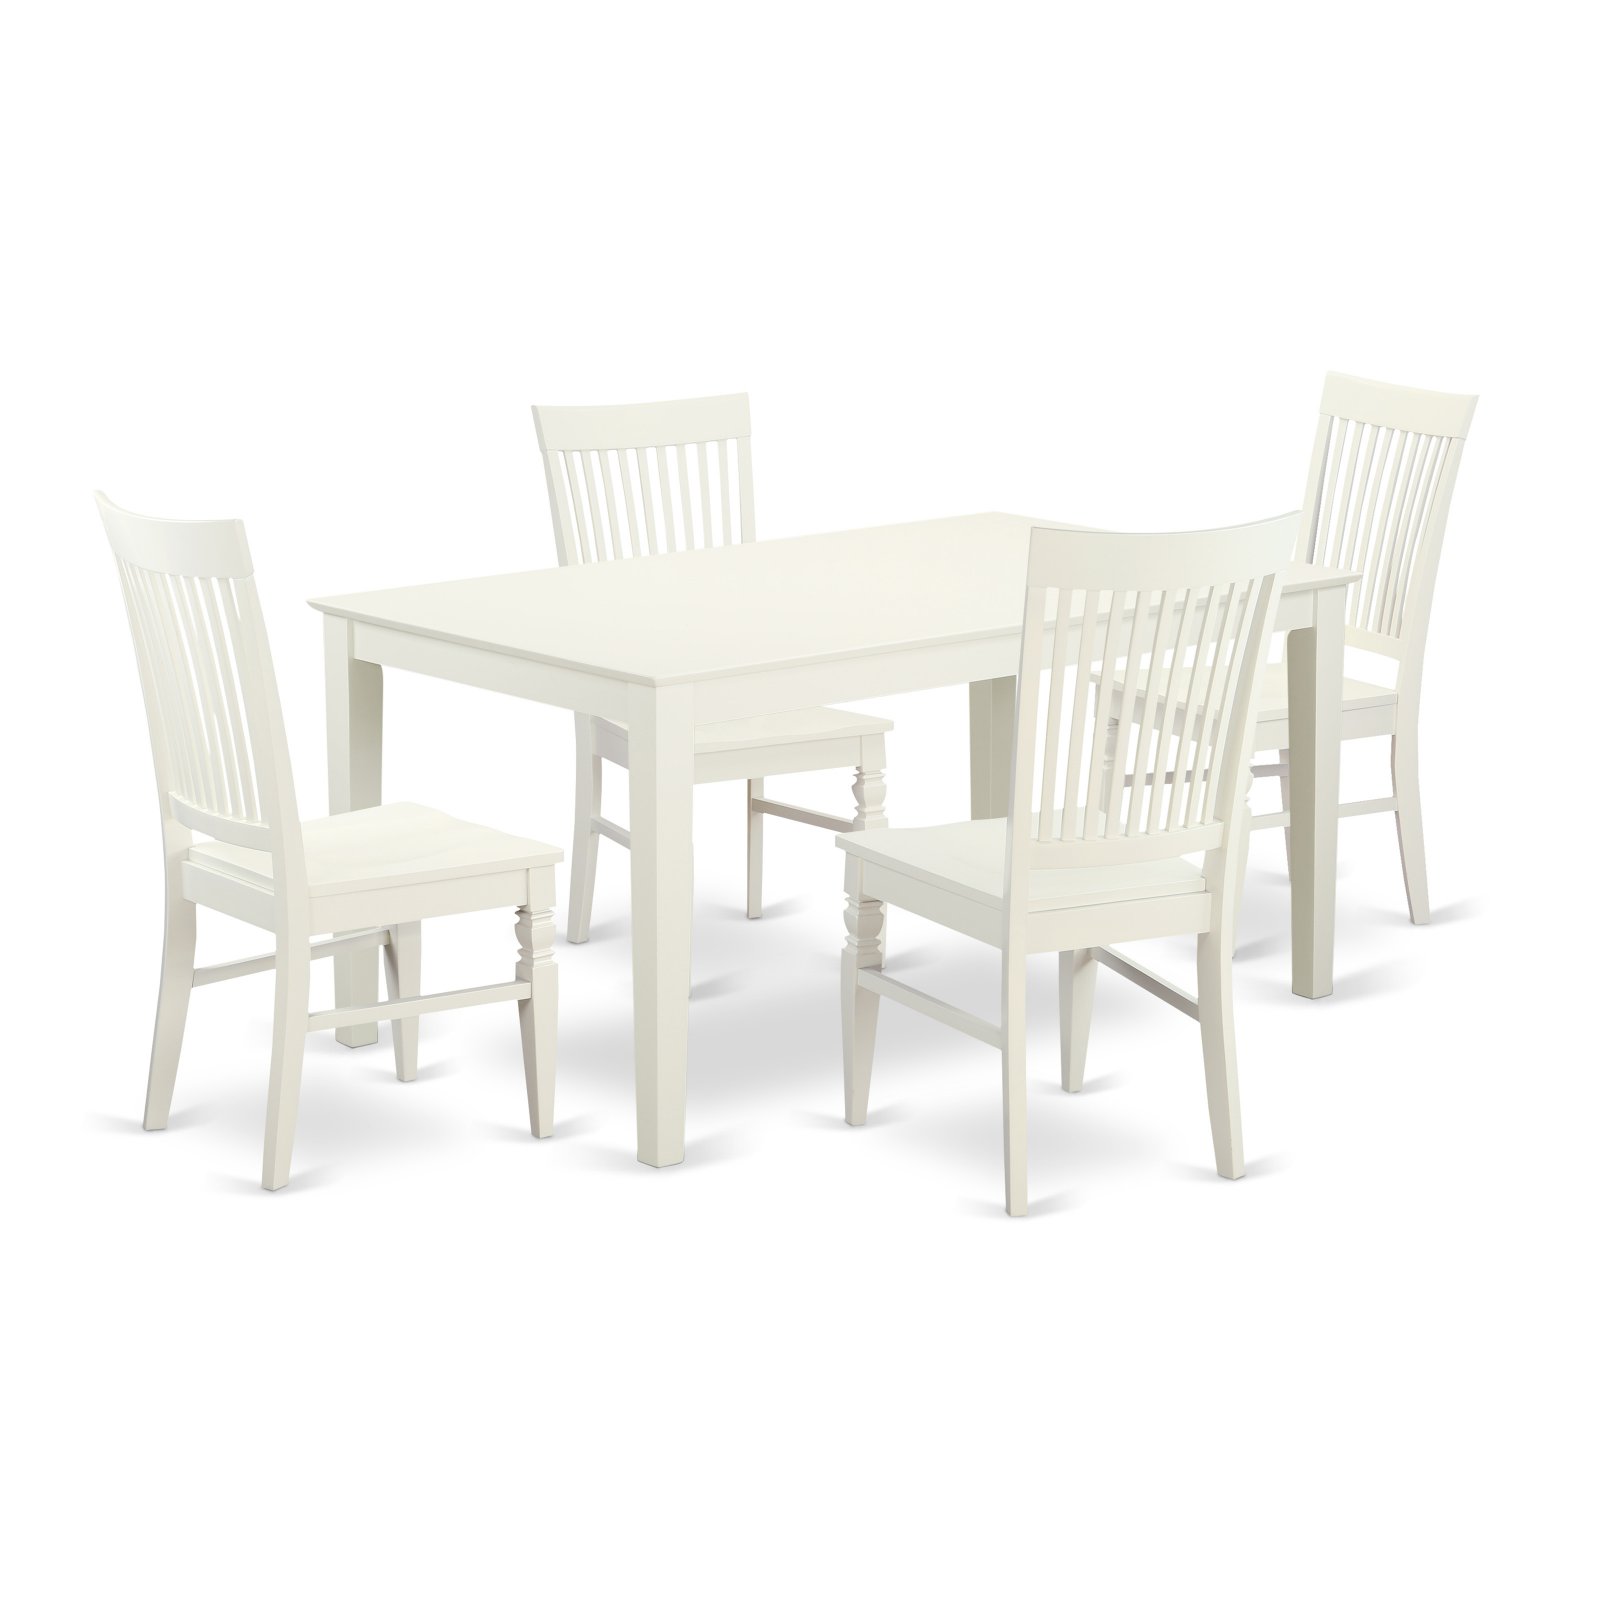 East West Furniture Capri 5-piece Wood Dining Set with Solid Tabletop in White - image 1 of 5